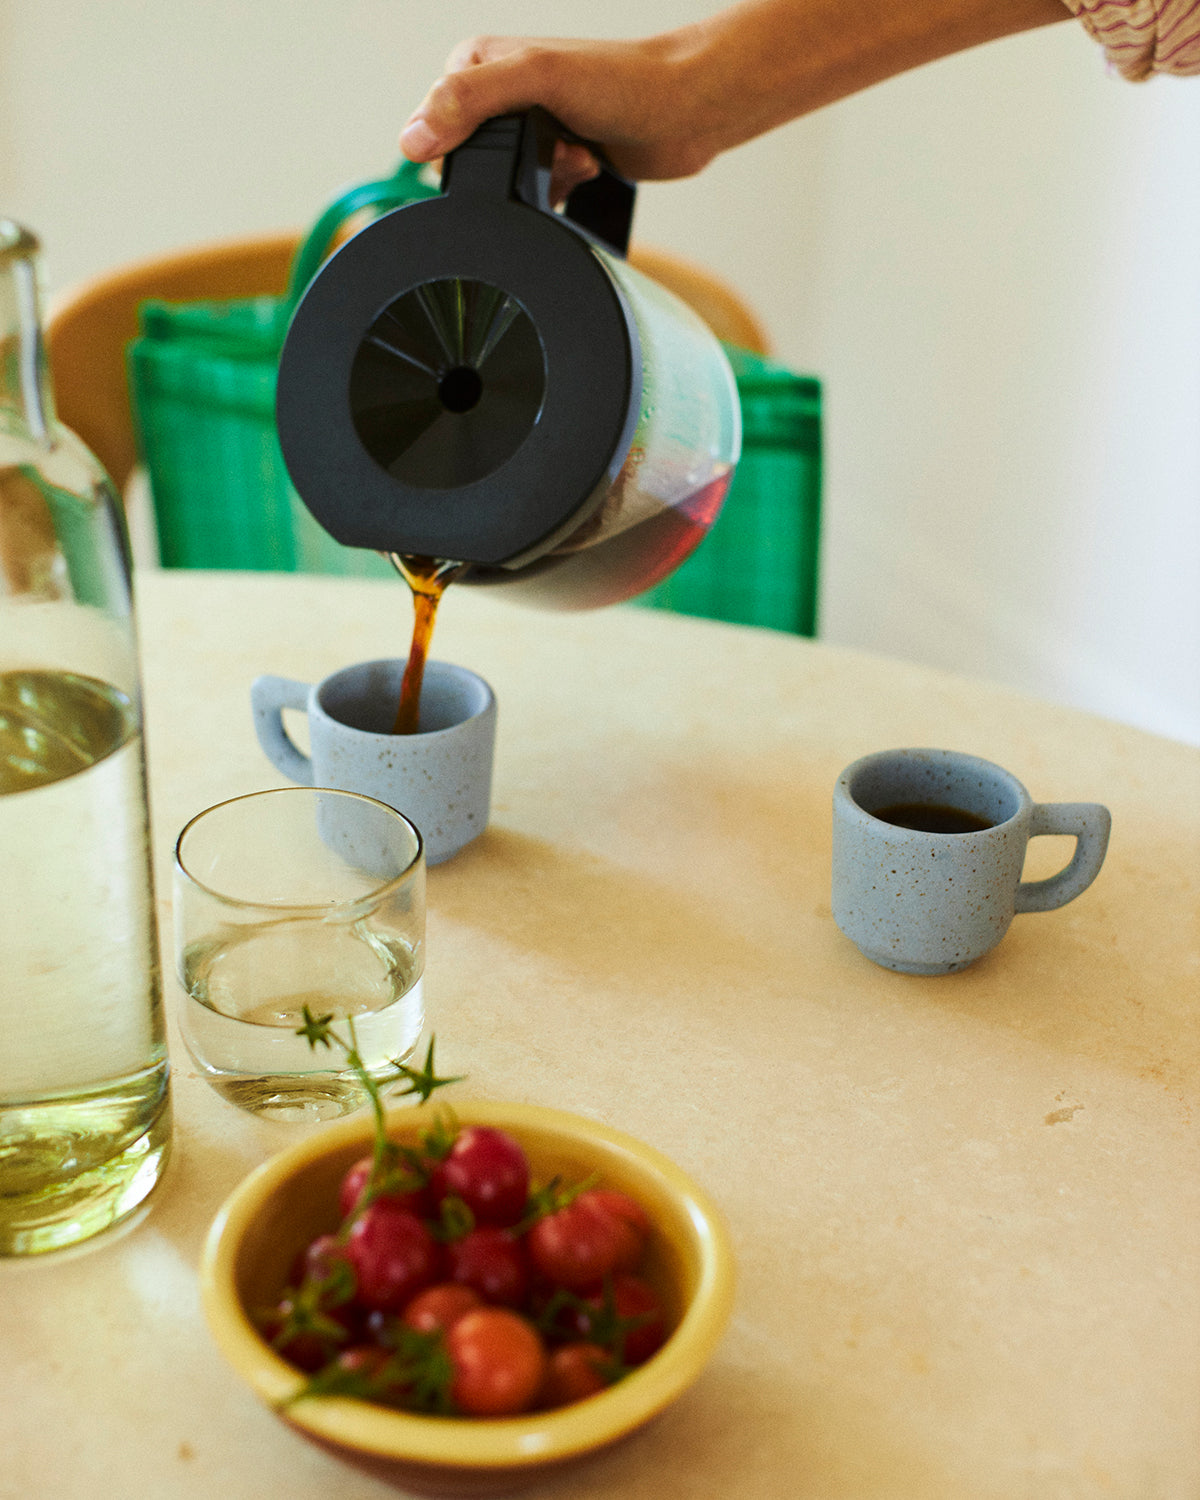 Moccamaster Cup-One Your cup of coffee directly in the mug